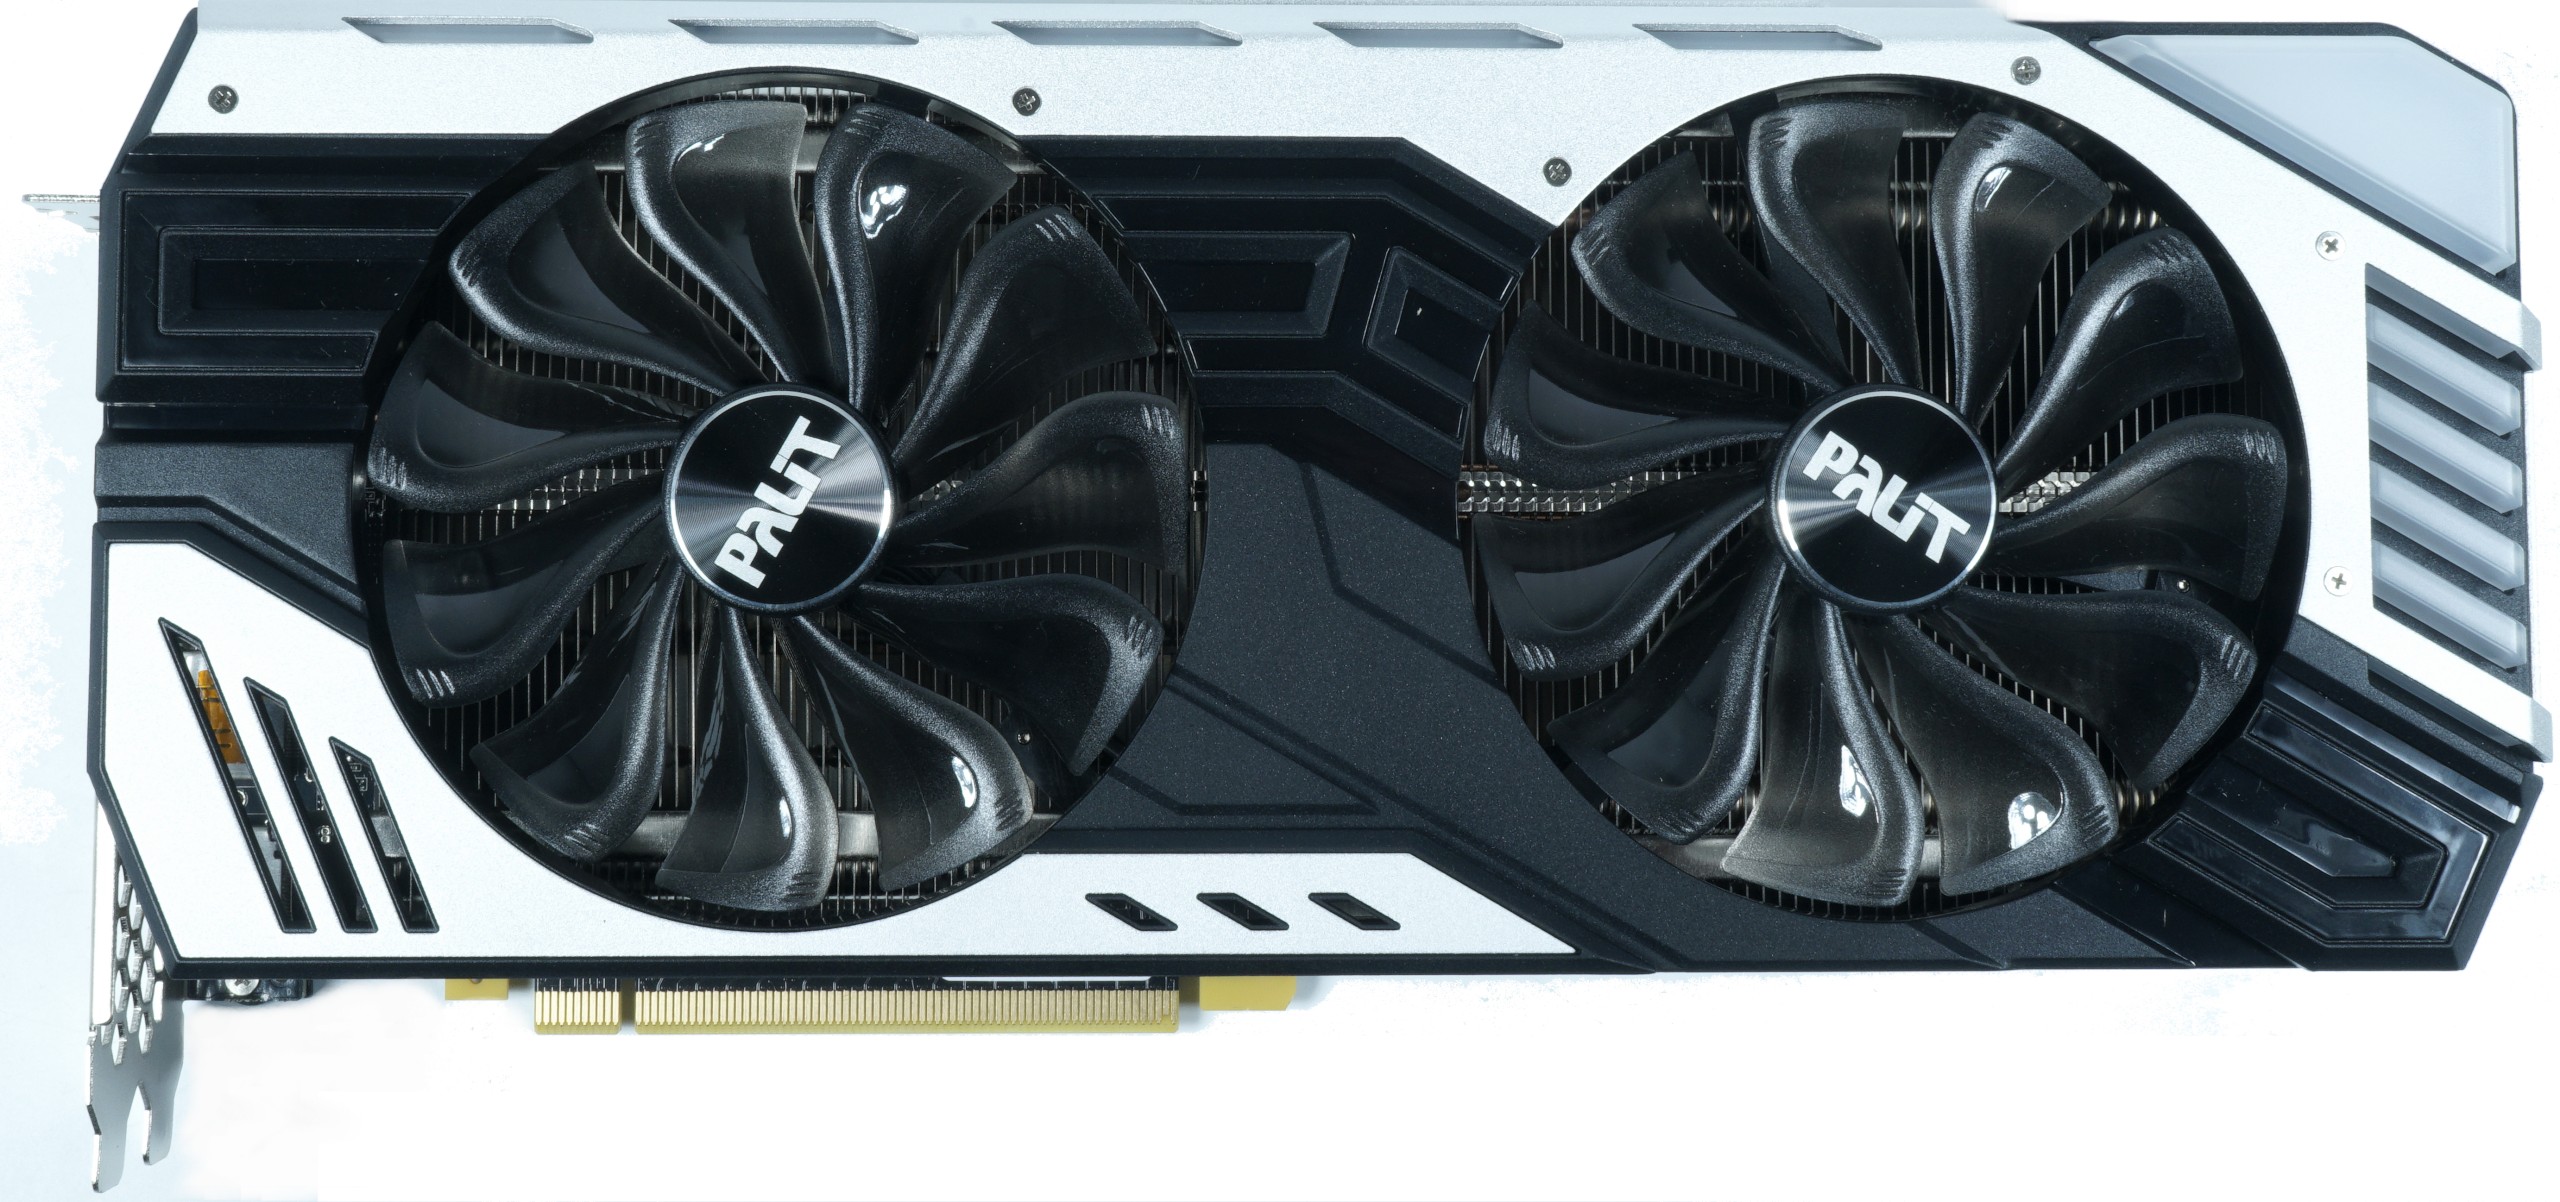 Palit RTX 2070 Super Jetstream review - Almost silent and ...